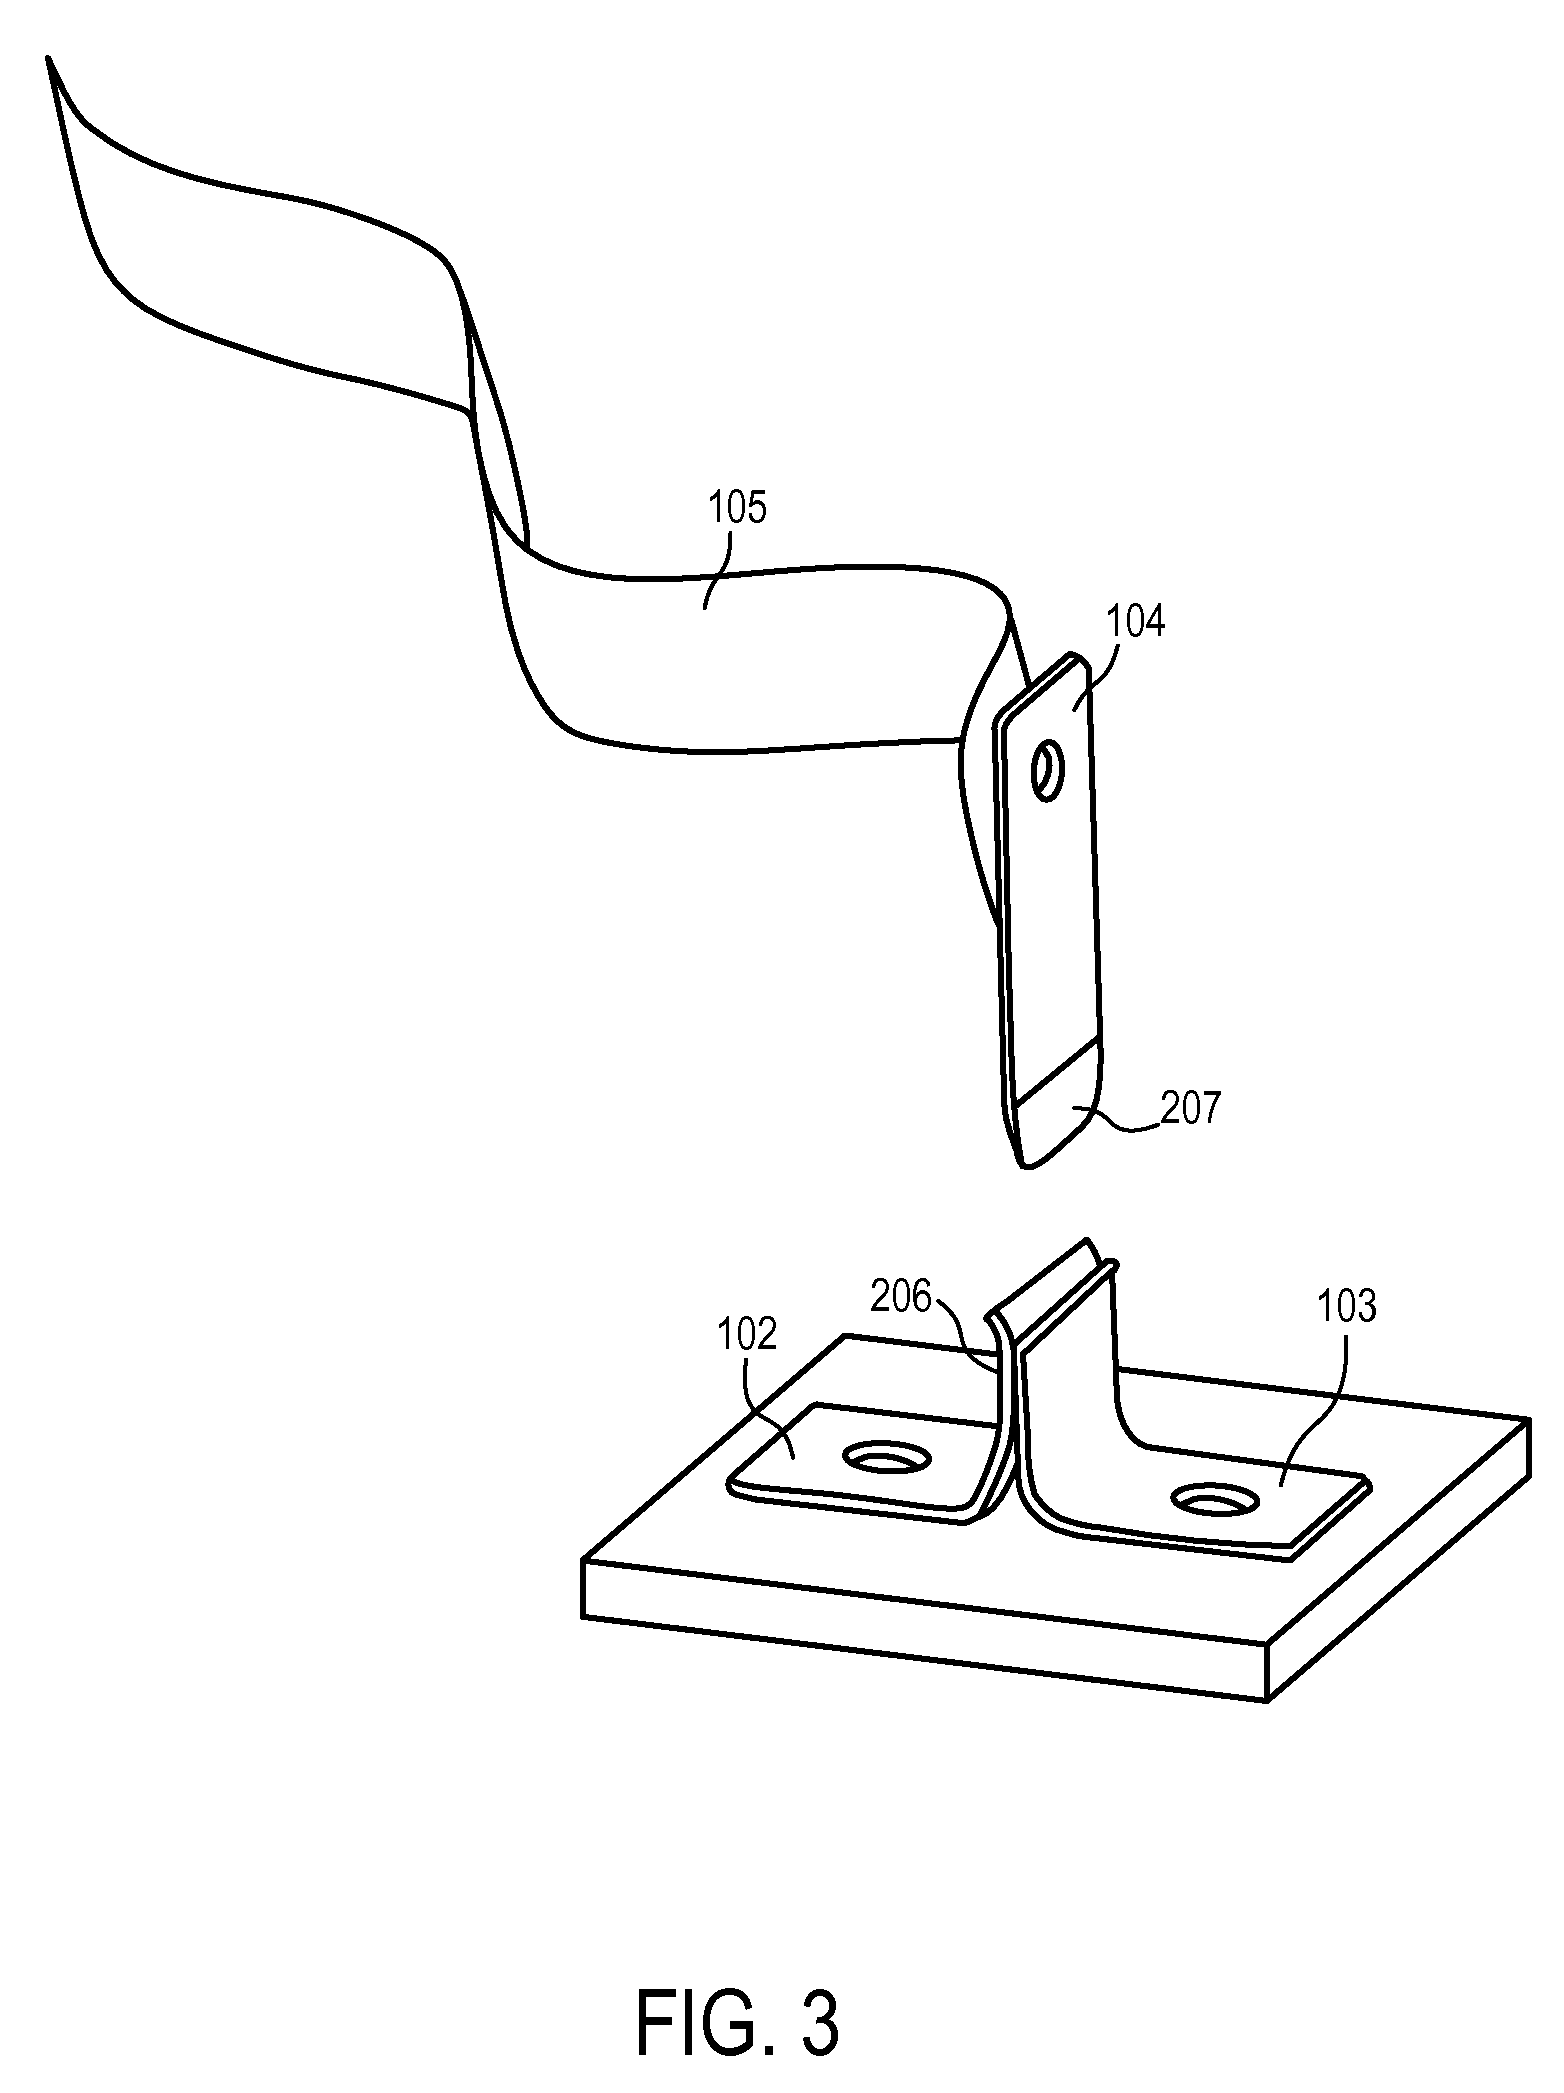 Apparatuses and Methods to Reduce Safety Risks Associated with Photovoltaic Systems